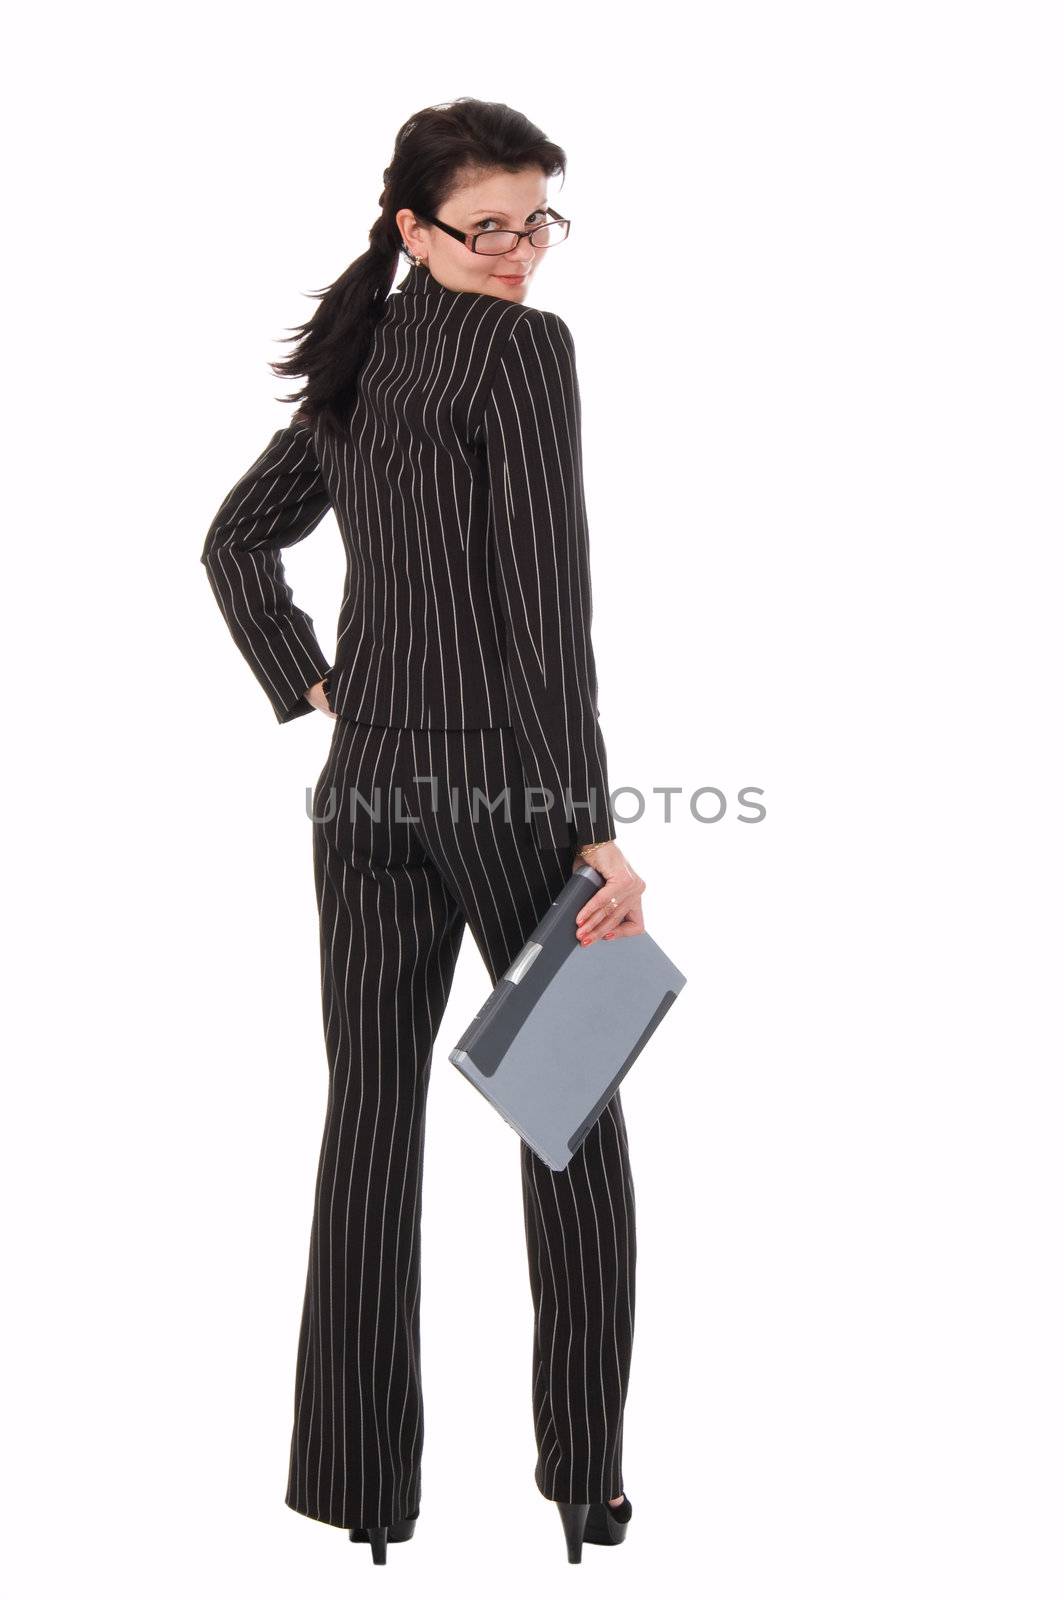 The woman in a business suit with notebook looks back